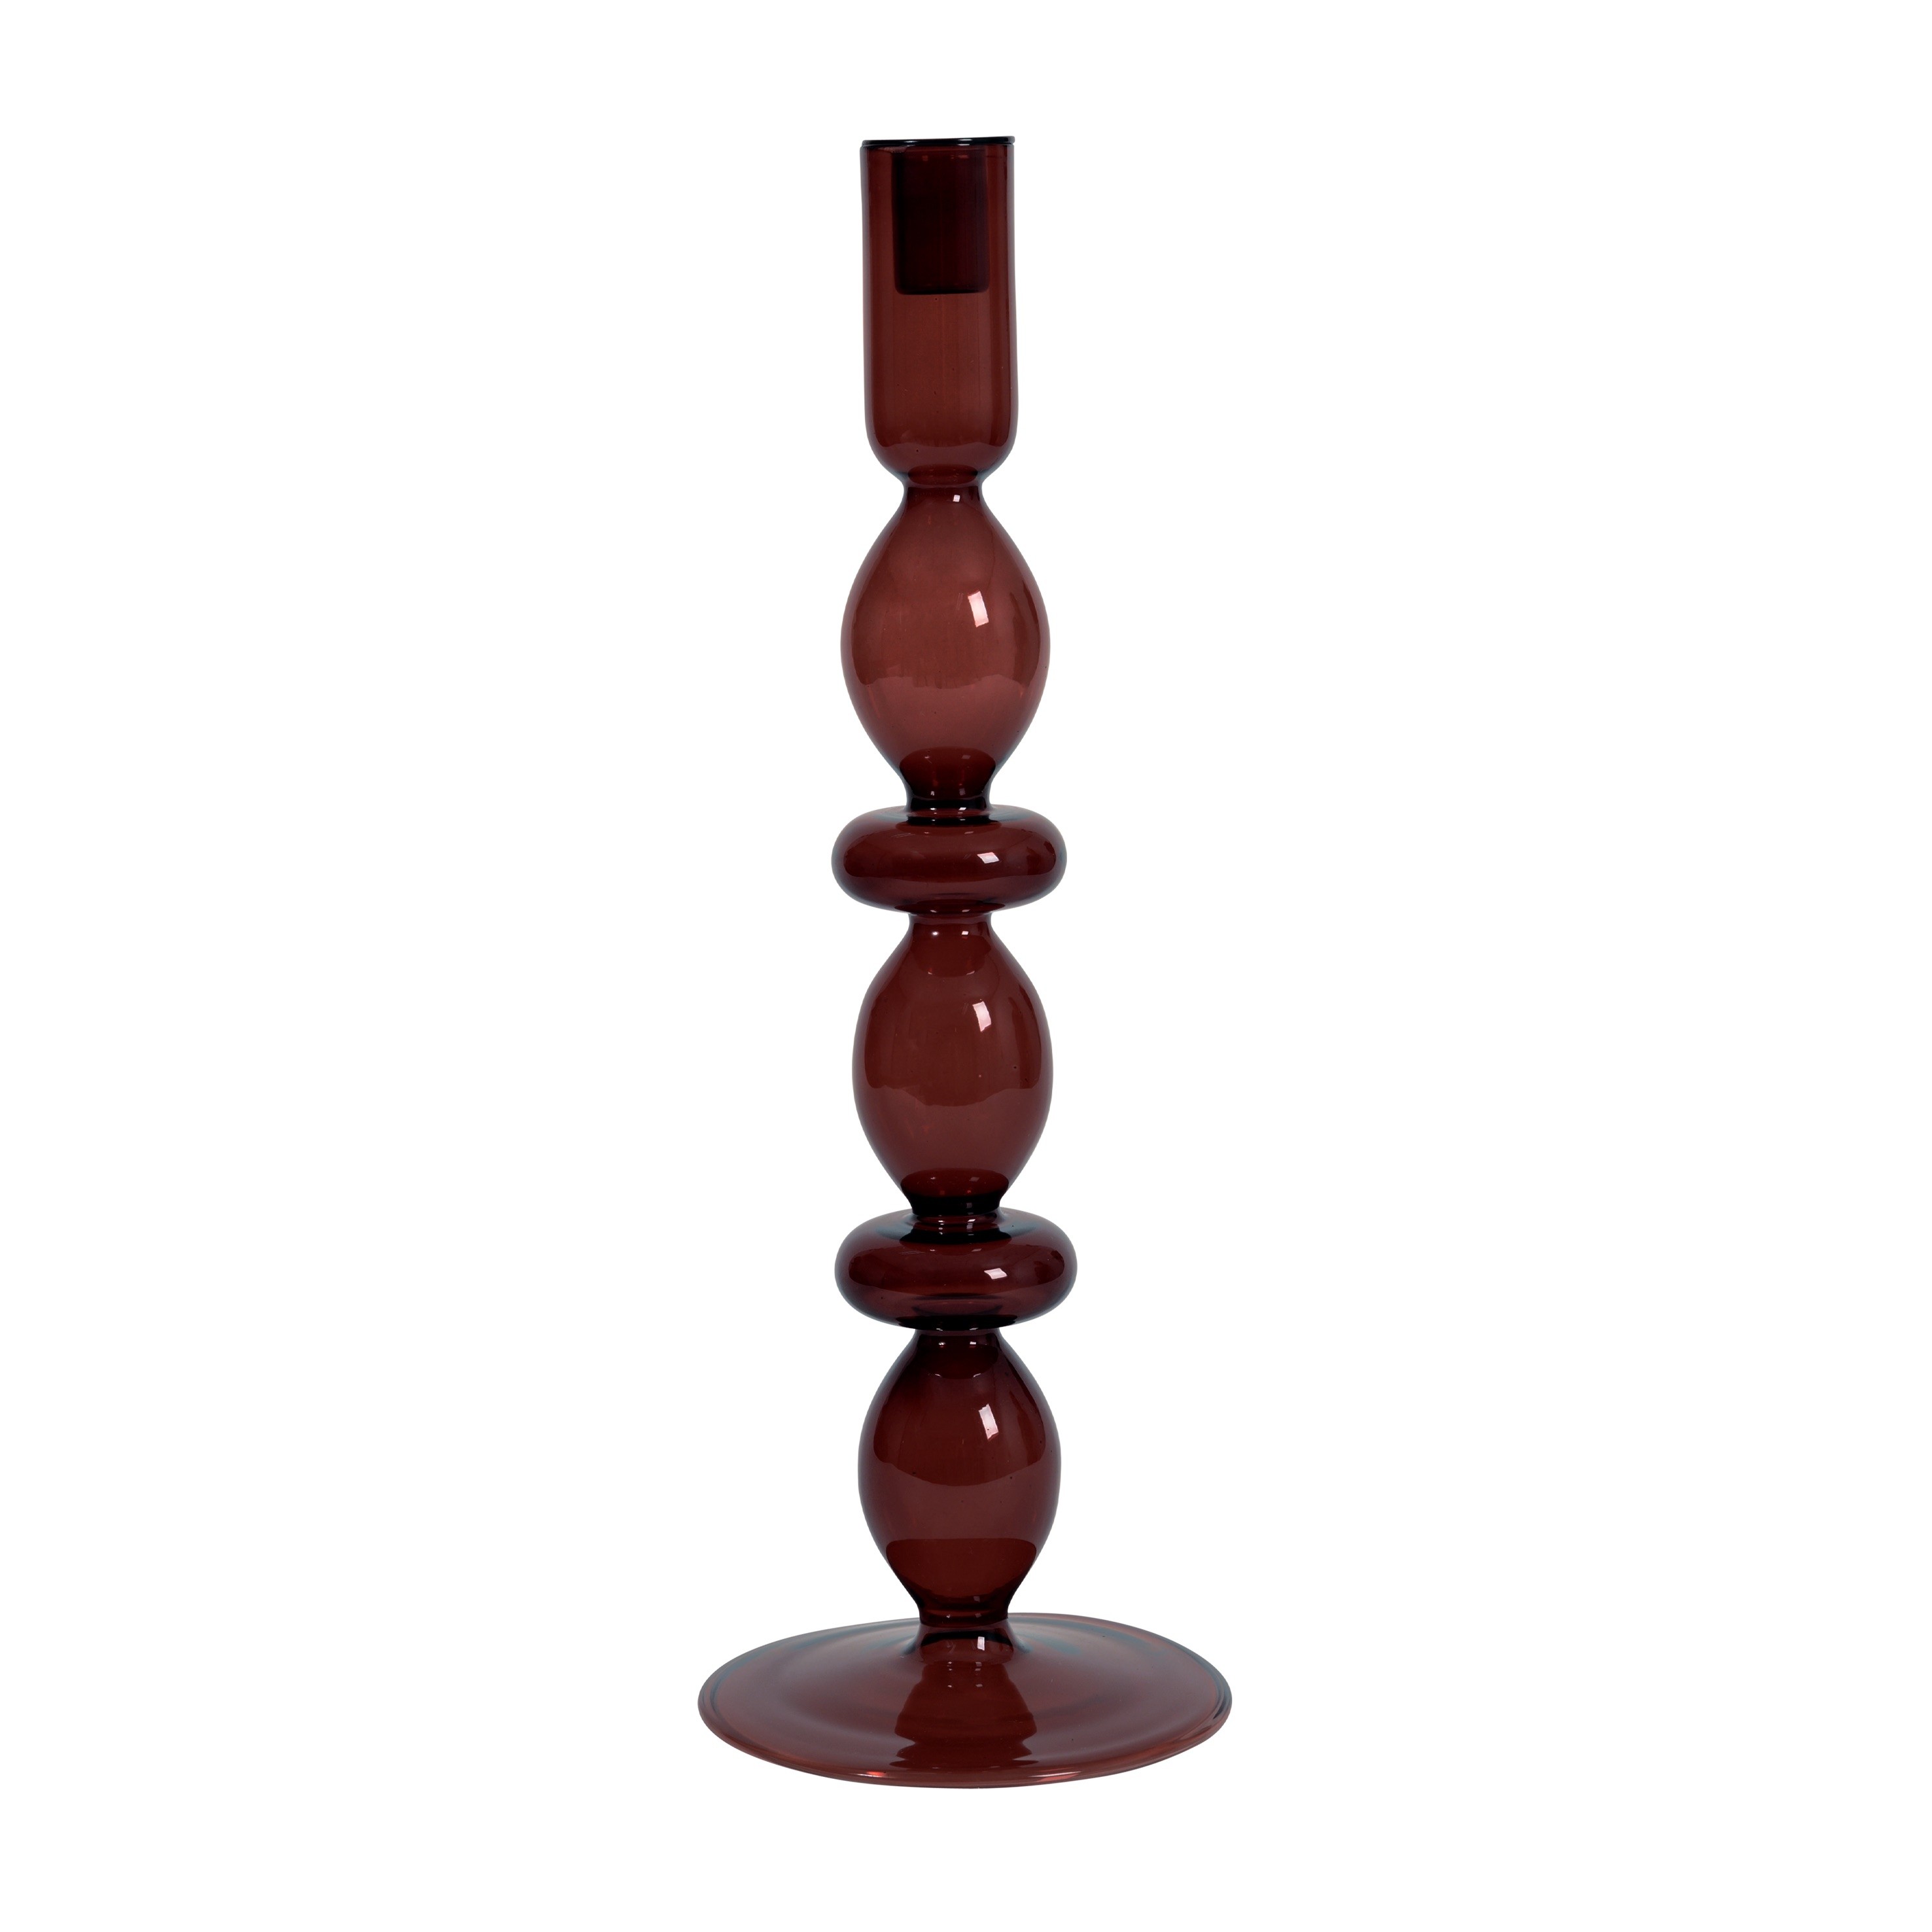 Urban Nature Culture Refined Large Candle Holder Russet Brown